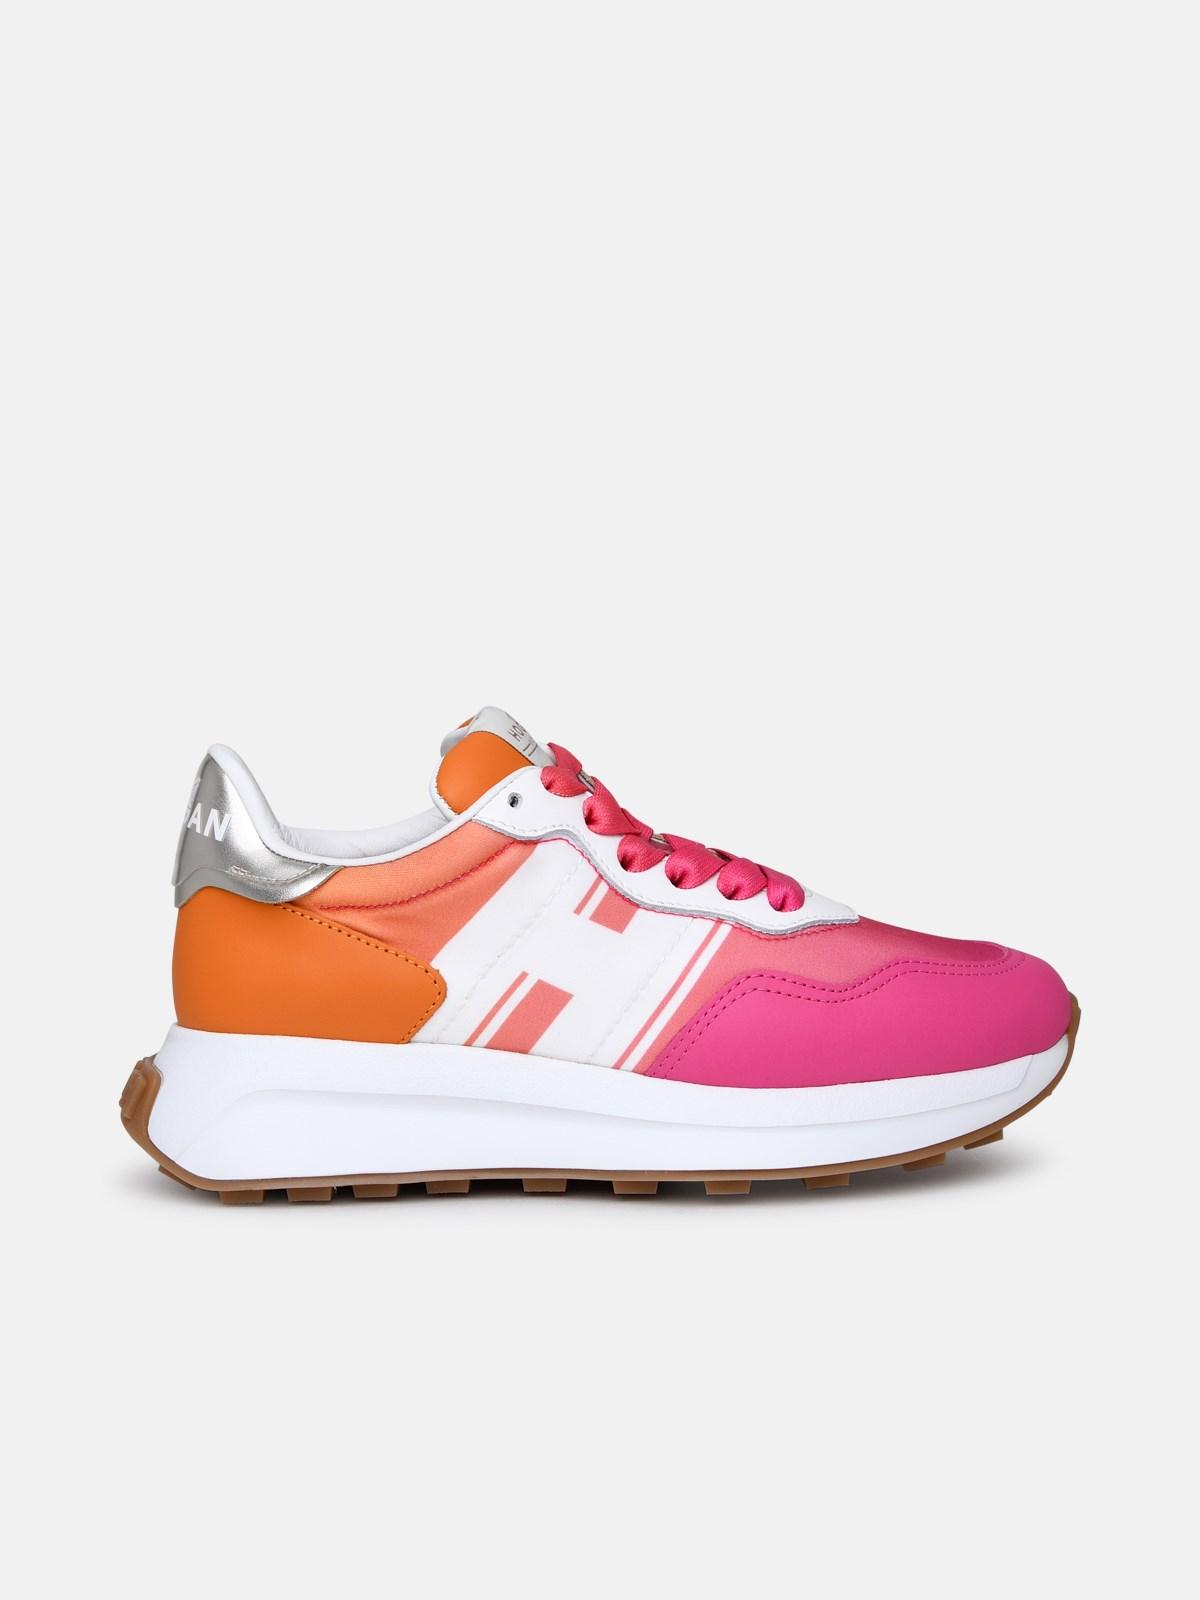 Hogan H641 Leather Sneaker in Pink | Lyst